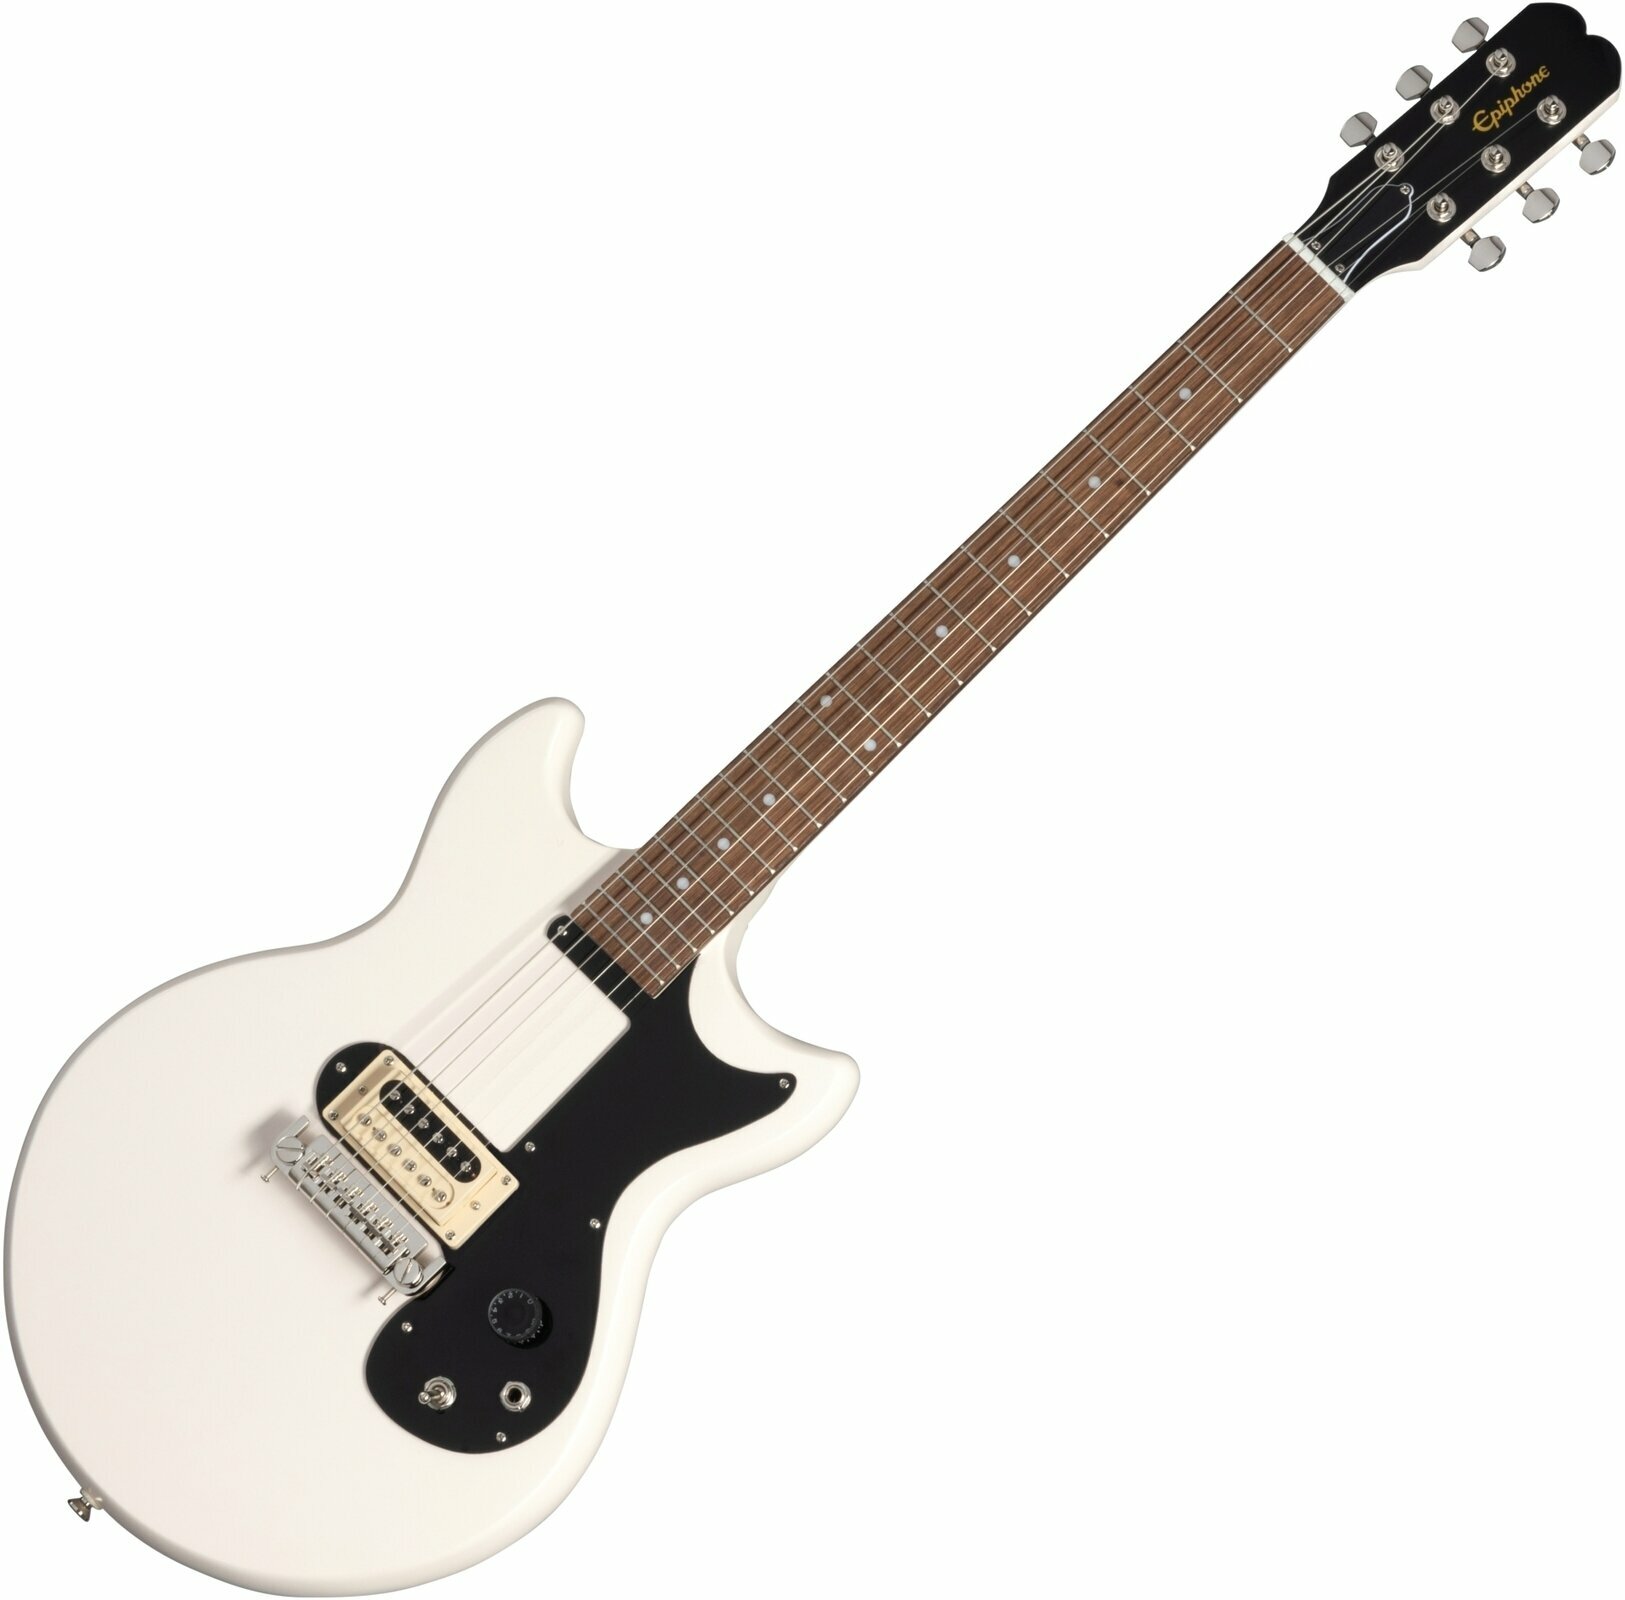 Epiphone Joan Jett Olympic Special Aged Classic White Epiphone